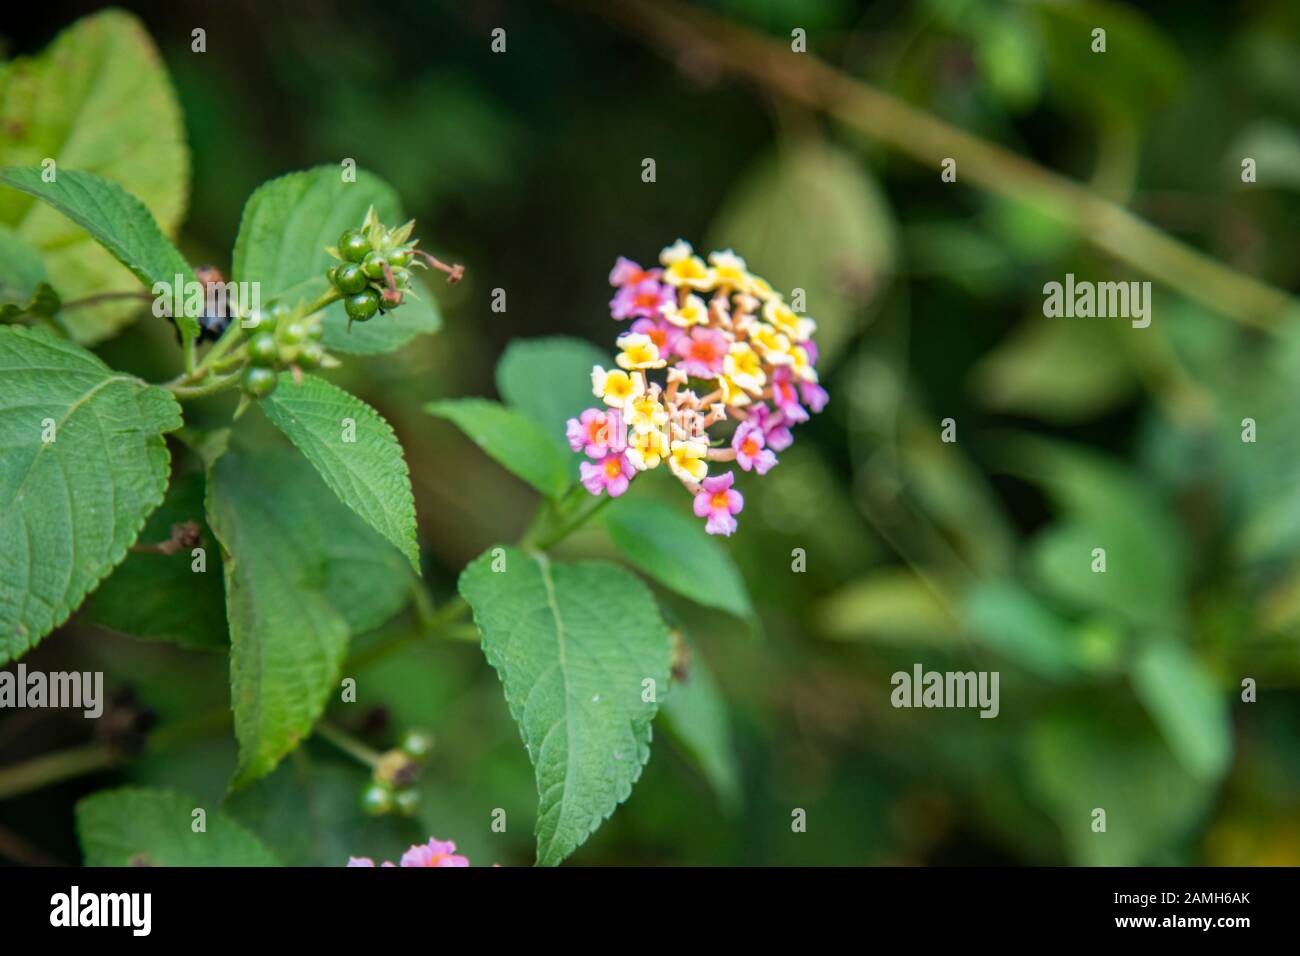 Lantana or West Indian Lantana flowers blooming in the garden Stock Photo